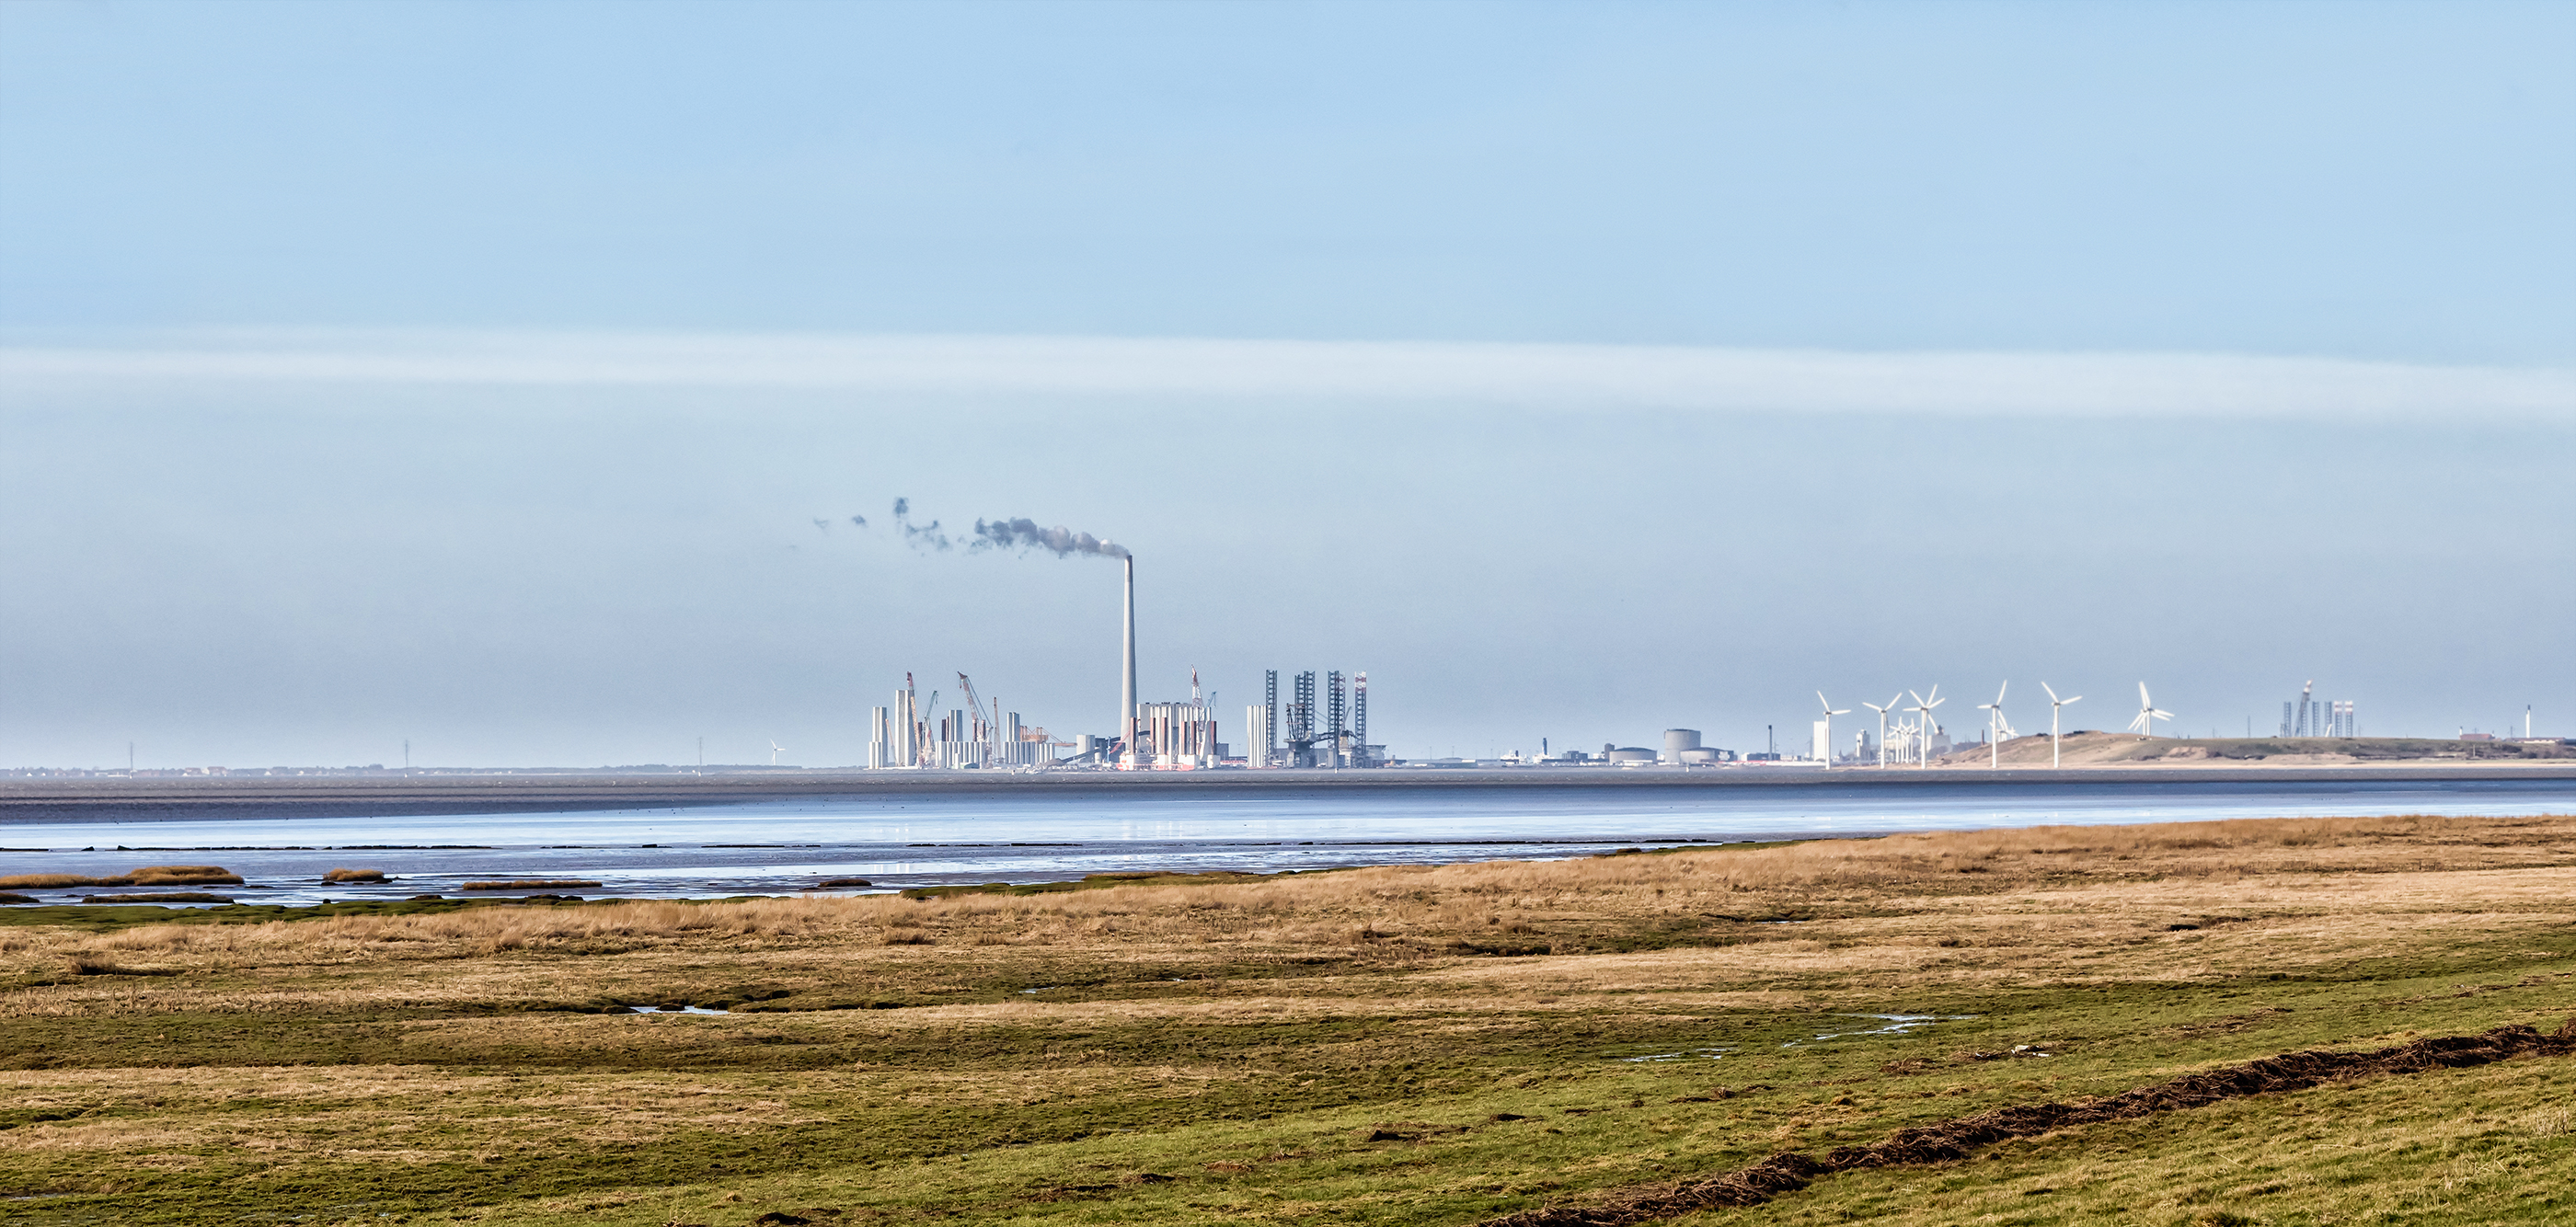 Esbjerg, Denmark, is an important location for the European wind industry.